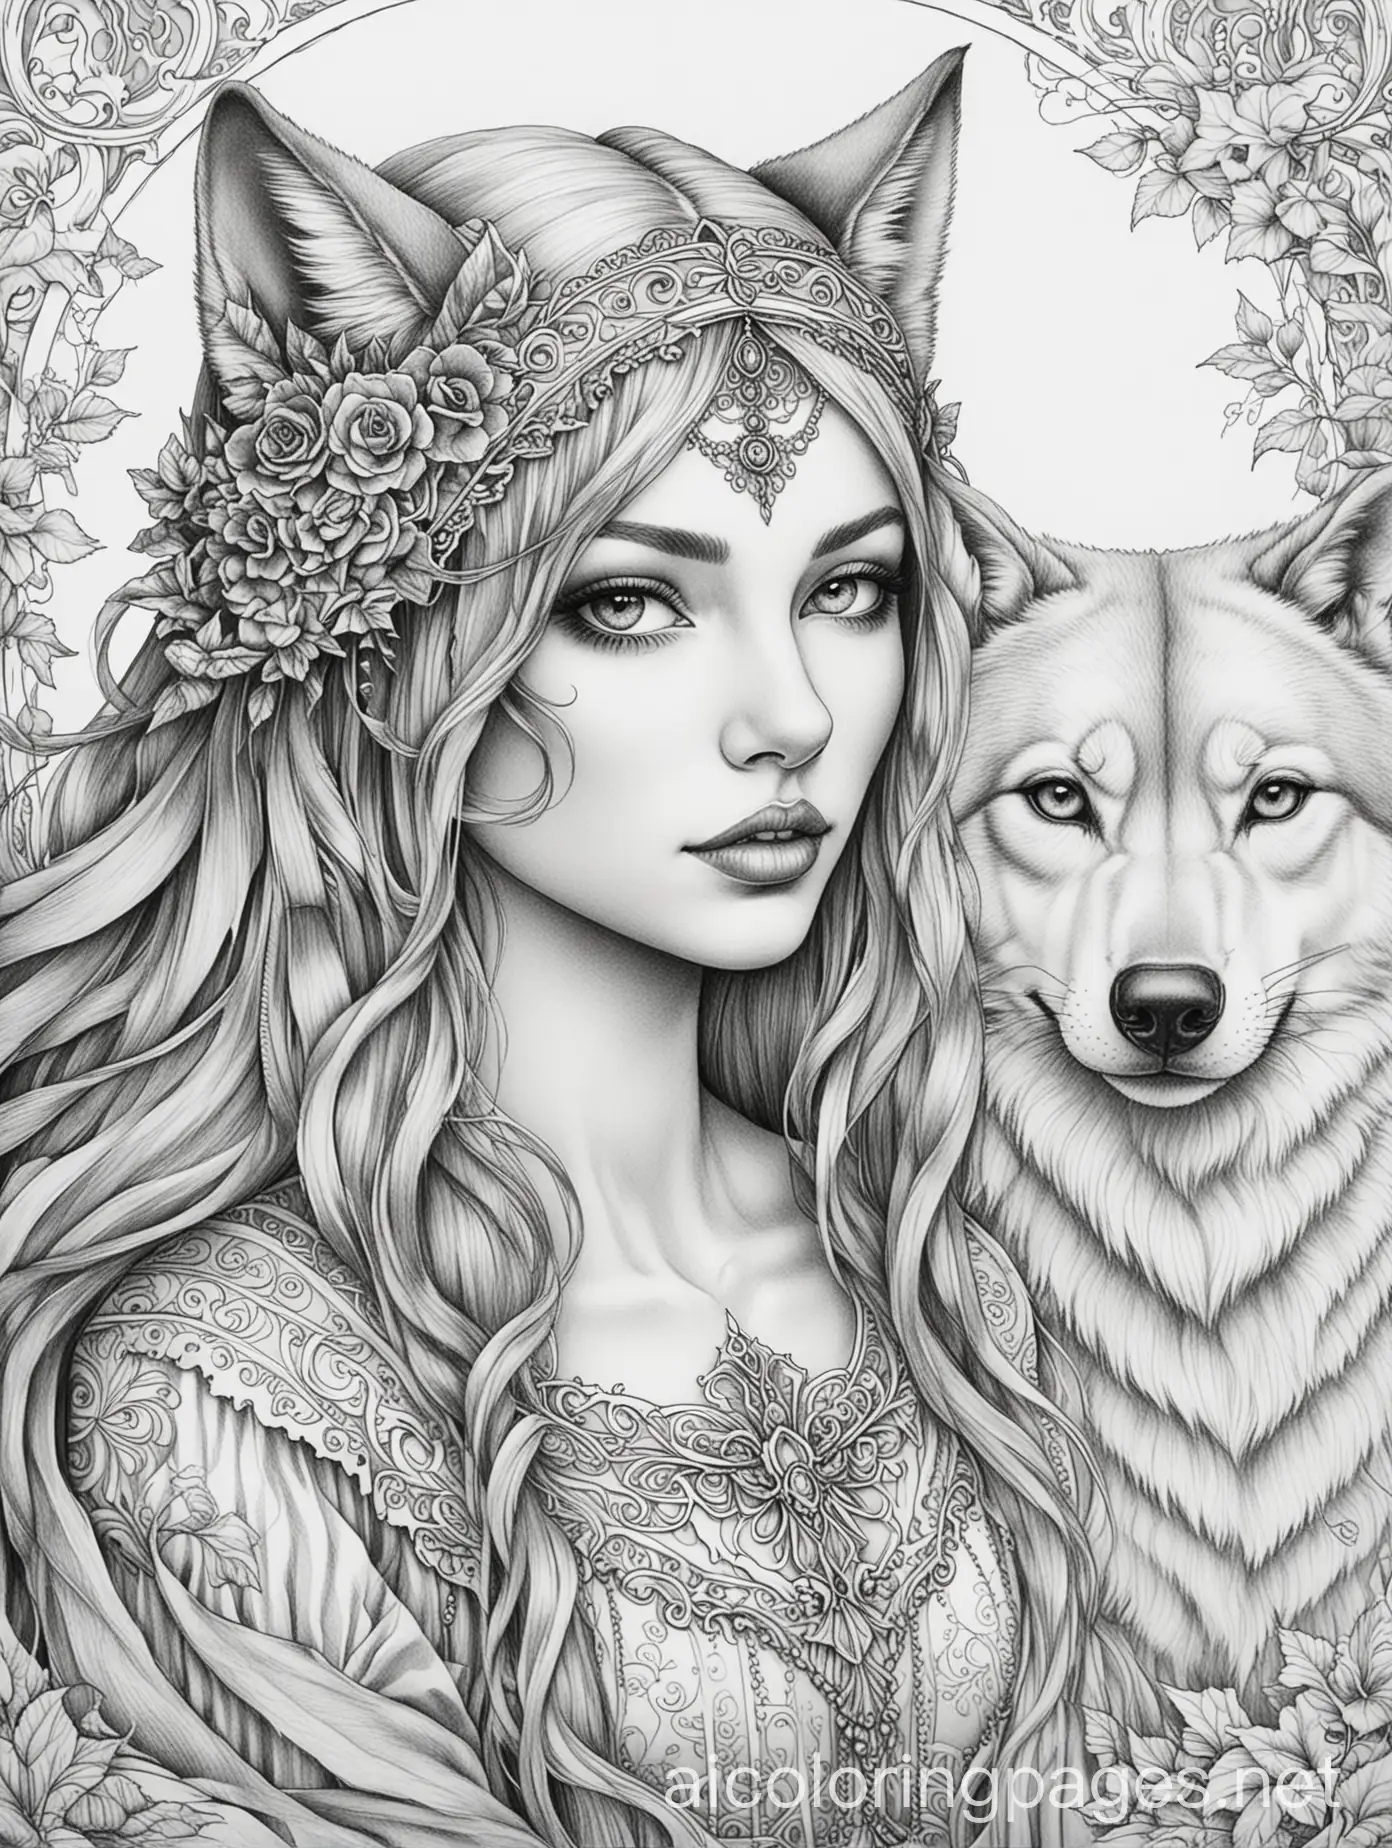 wolf and gothic lady adult colouring book
, Coloring Page, black and white, line art, white background, Simplicity, Ample White Space. The background of the coloring page is plain white to make it easy for young children to color within the lines. The outlines of all the subjects are easy to distinguish, making it simple for kids to color without too much difficulty